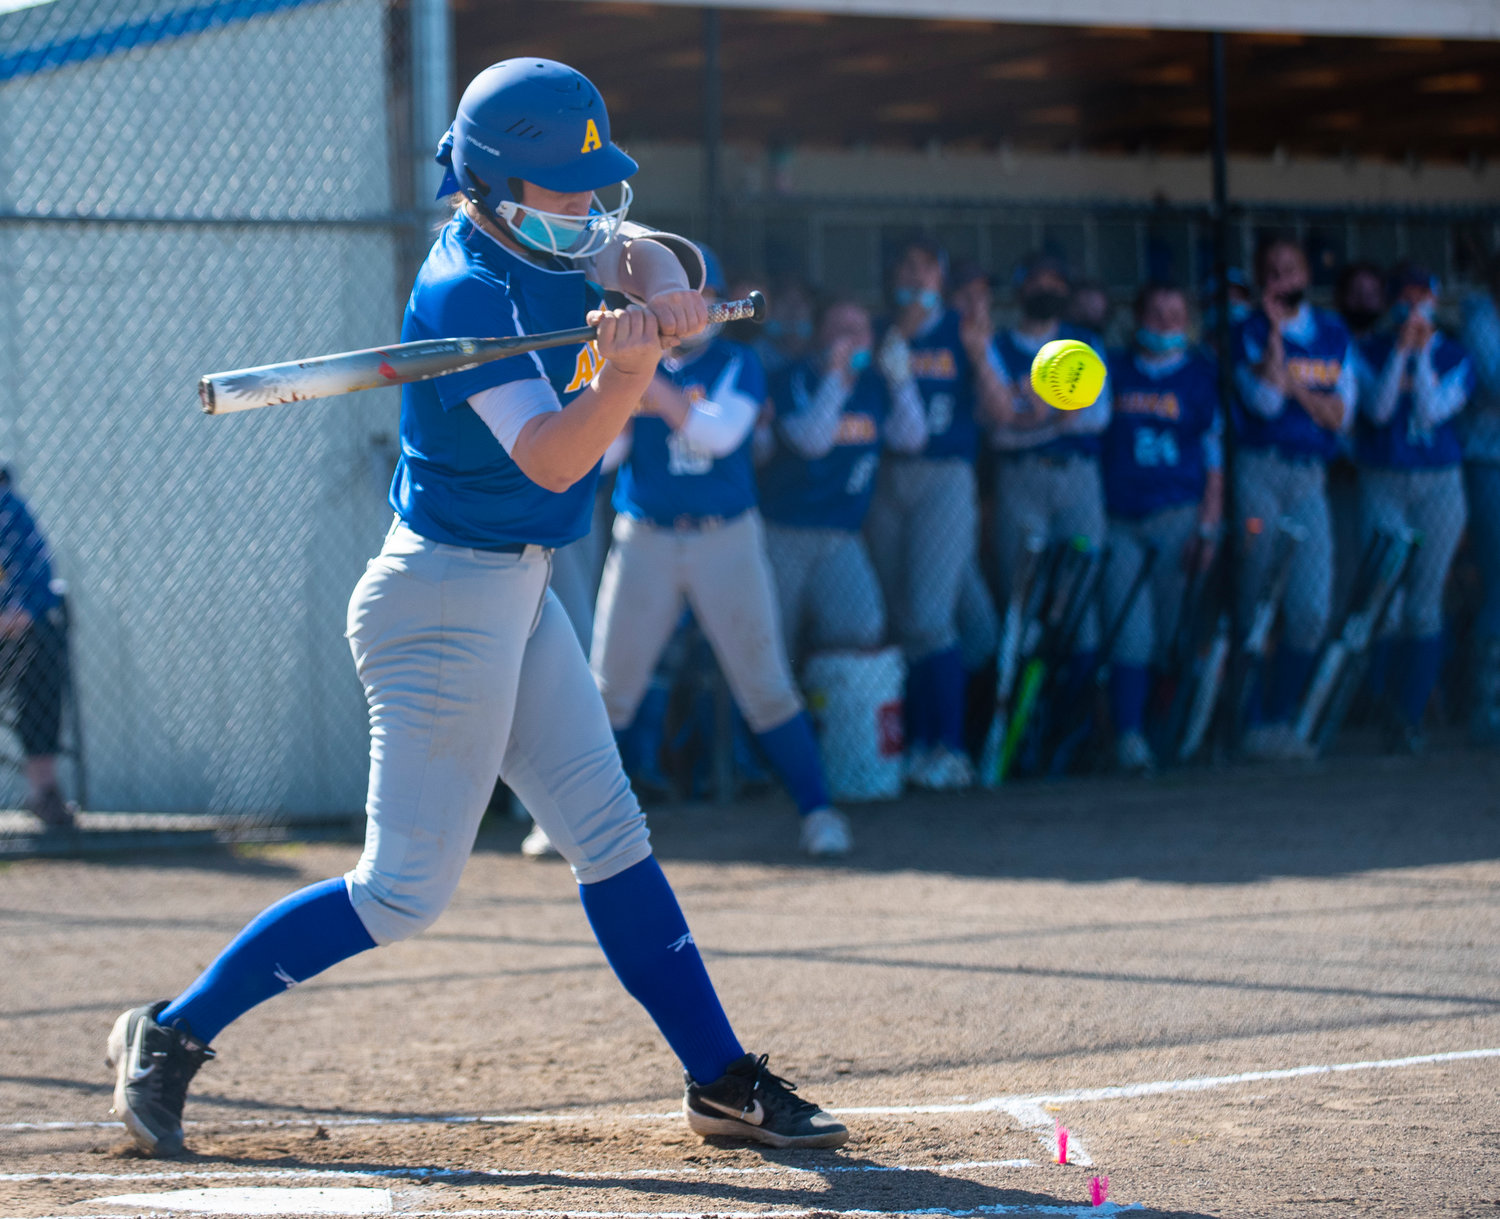 Adna's Haley Rainey loads up to swing at a Toledo pitch on Monday